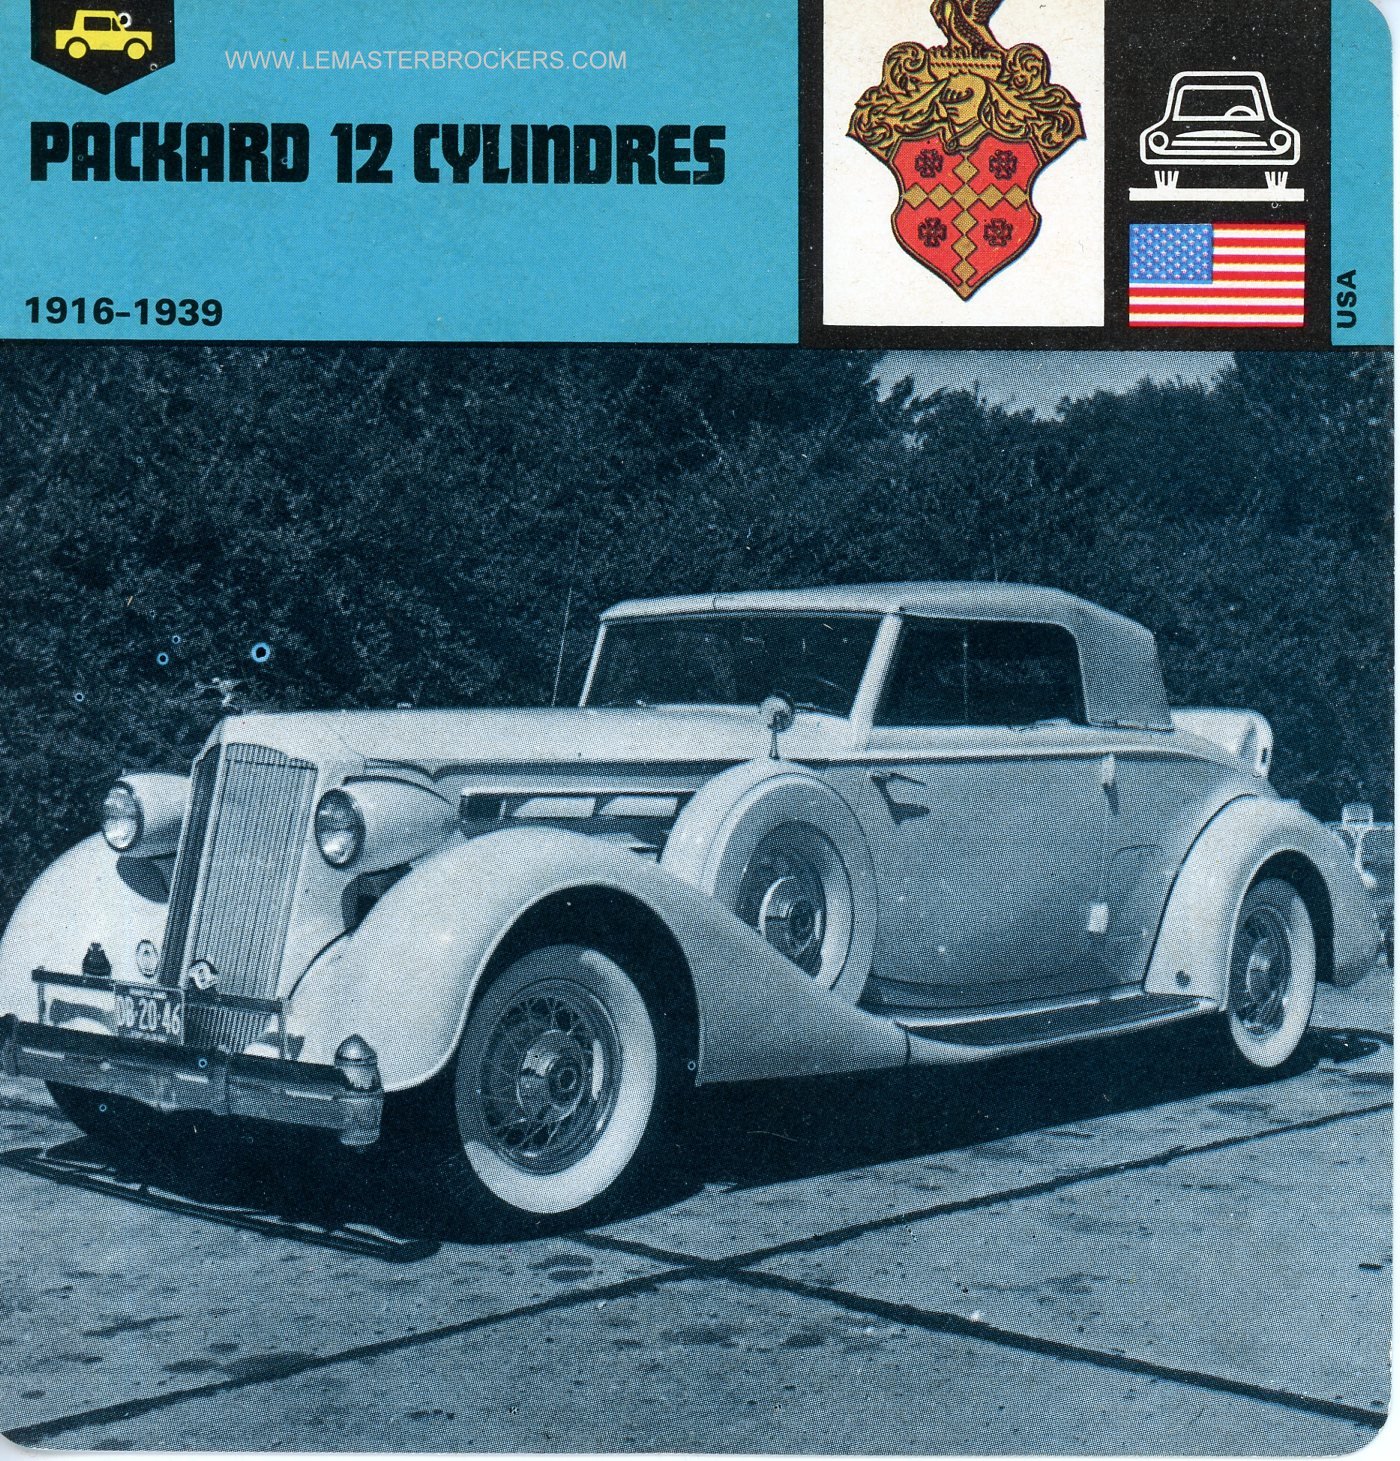 FICHE PACKARD 12 CYLINDRES 1916-1939